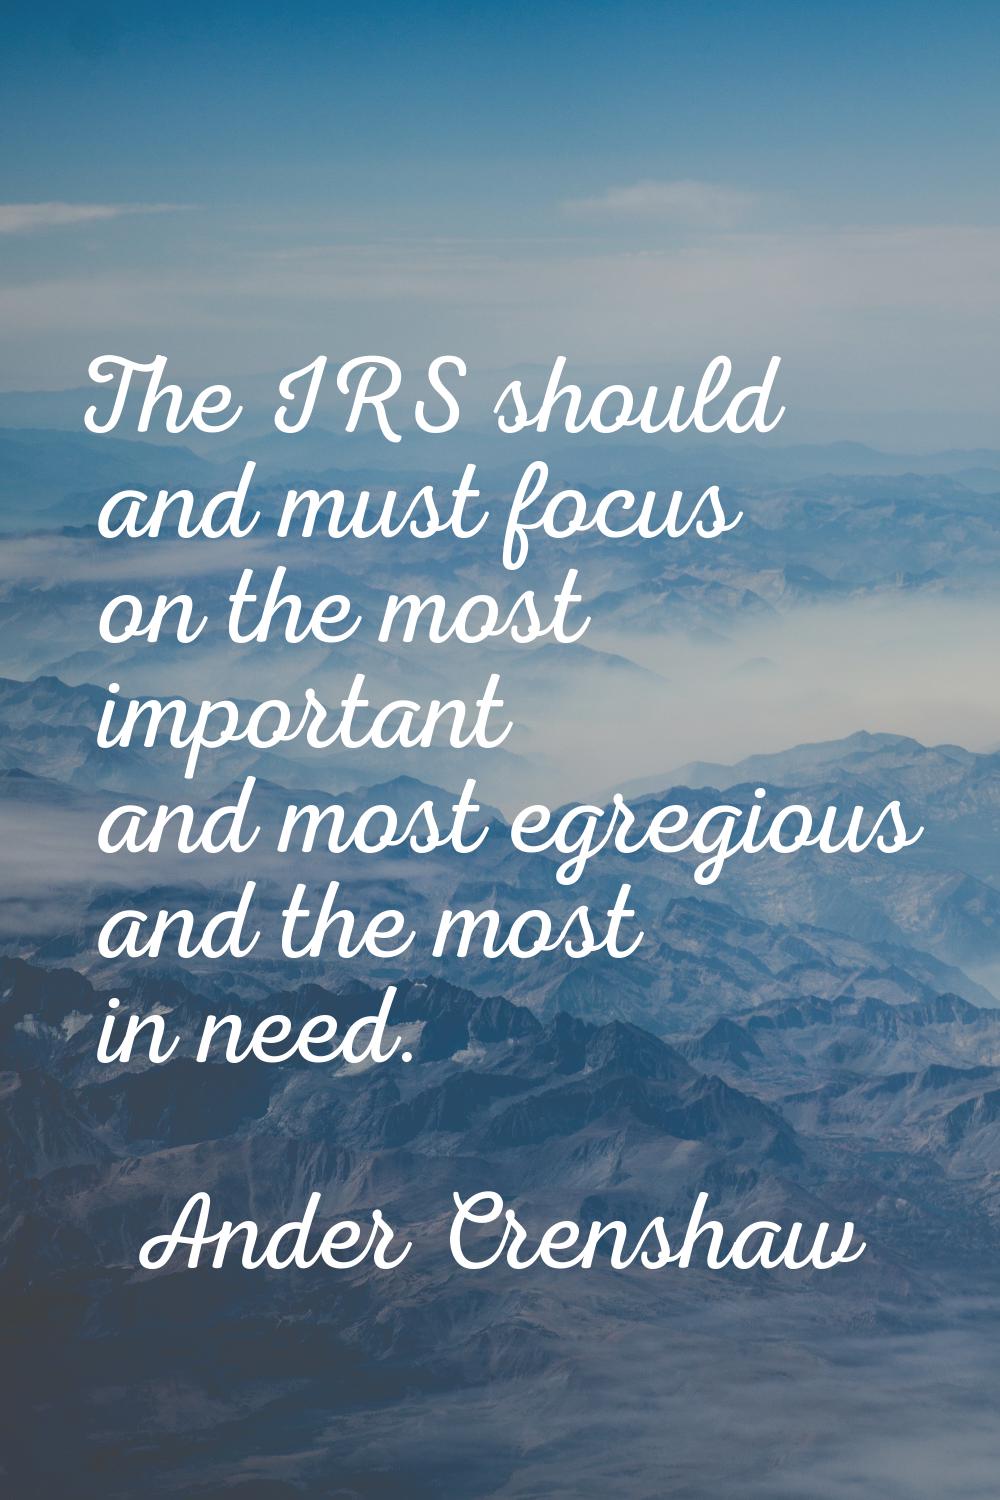 The IRS should and must focus on the most important and most egregious and the most in need.